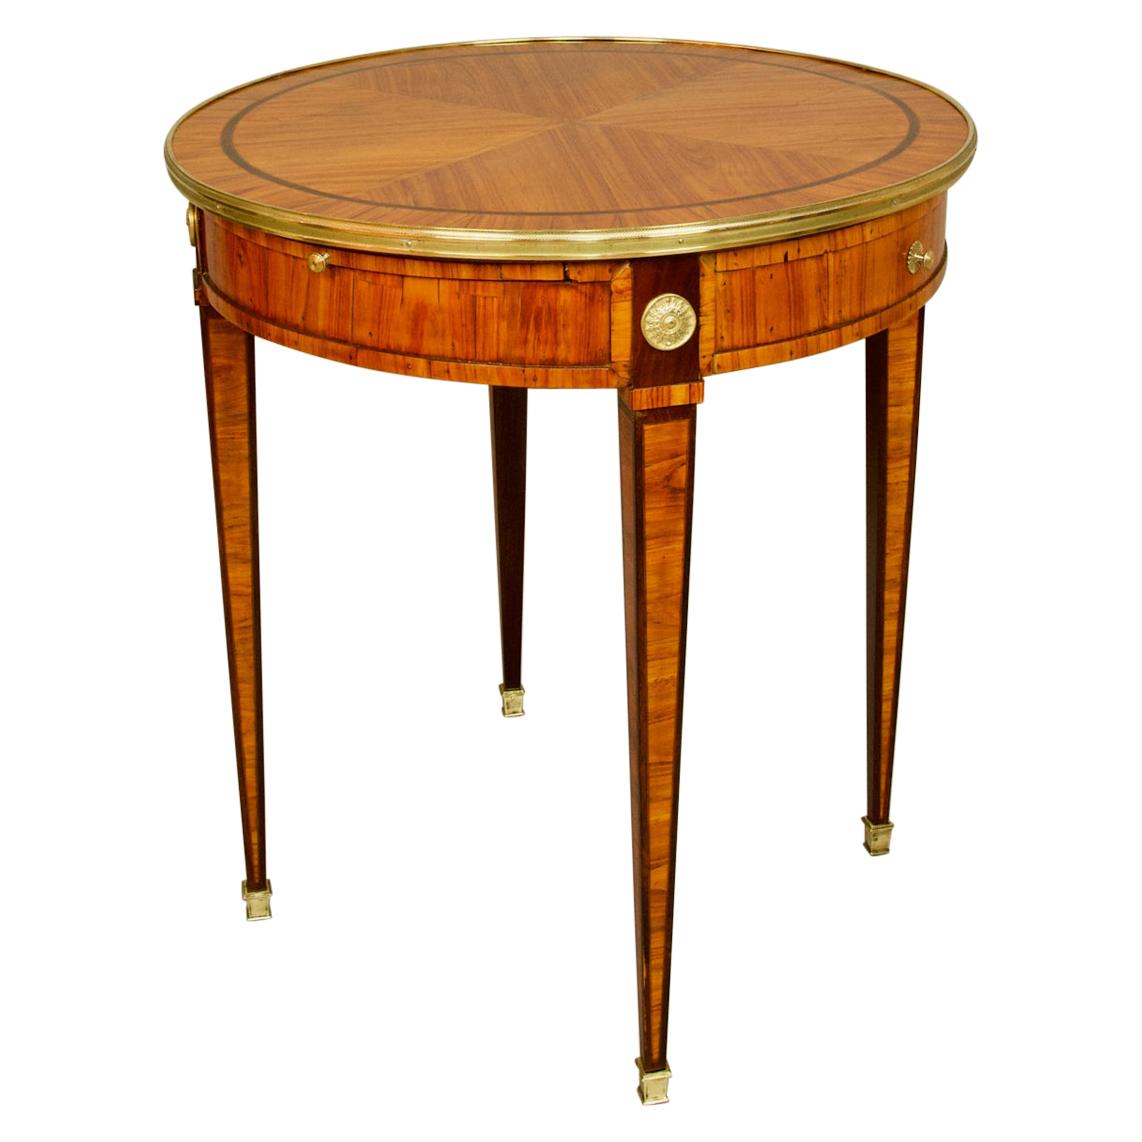 French Louis XVI 18th Century Marquetry Gilt Bronze Round Side Table or Gueridon